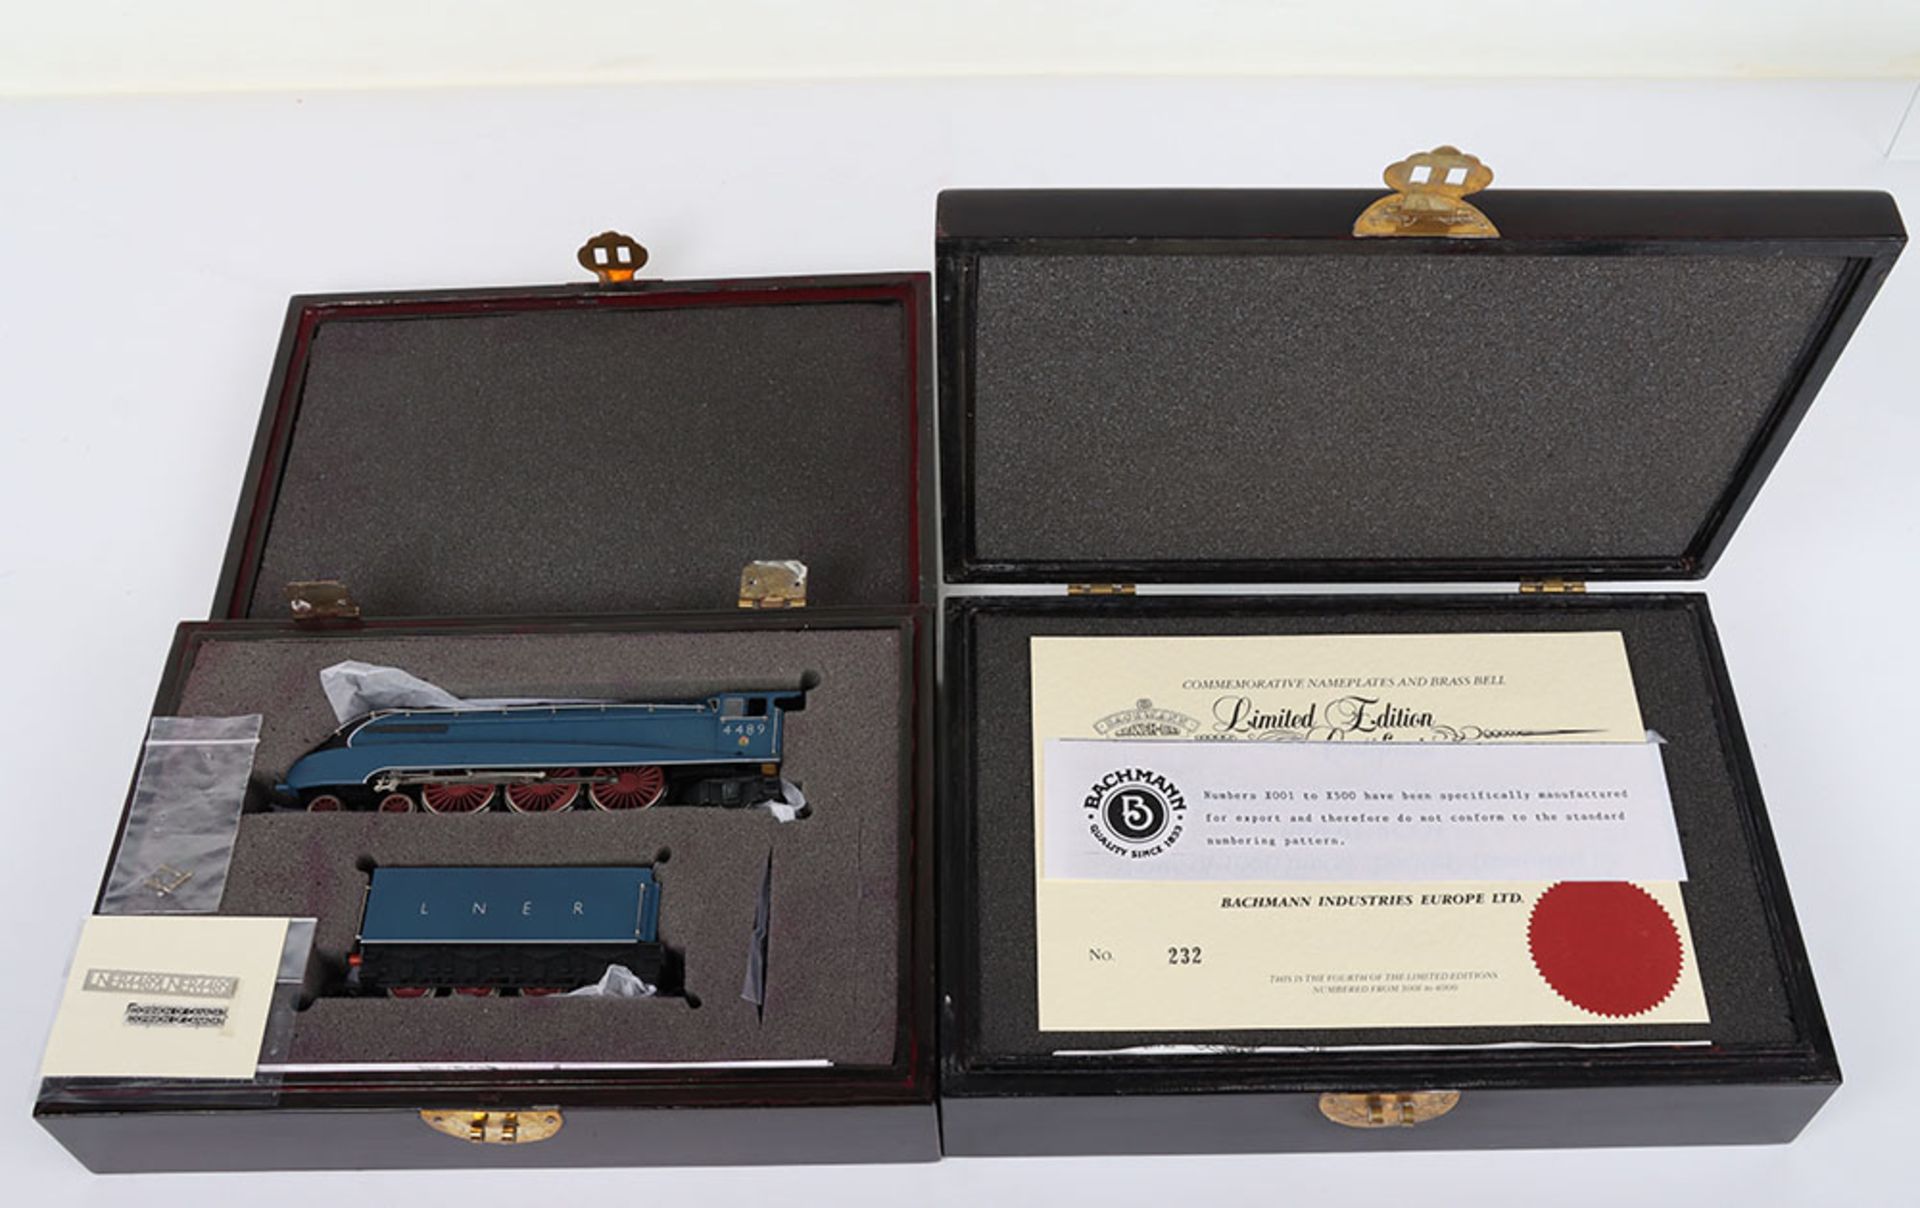 Two Bachmann Limited Edition locomotives in wooden presentation boxes